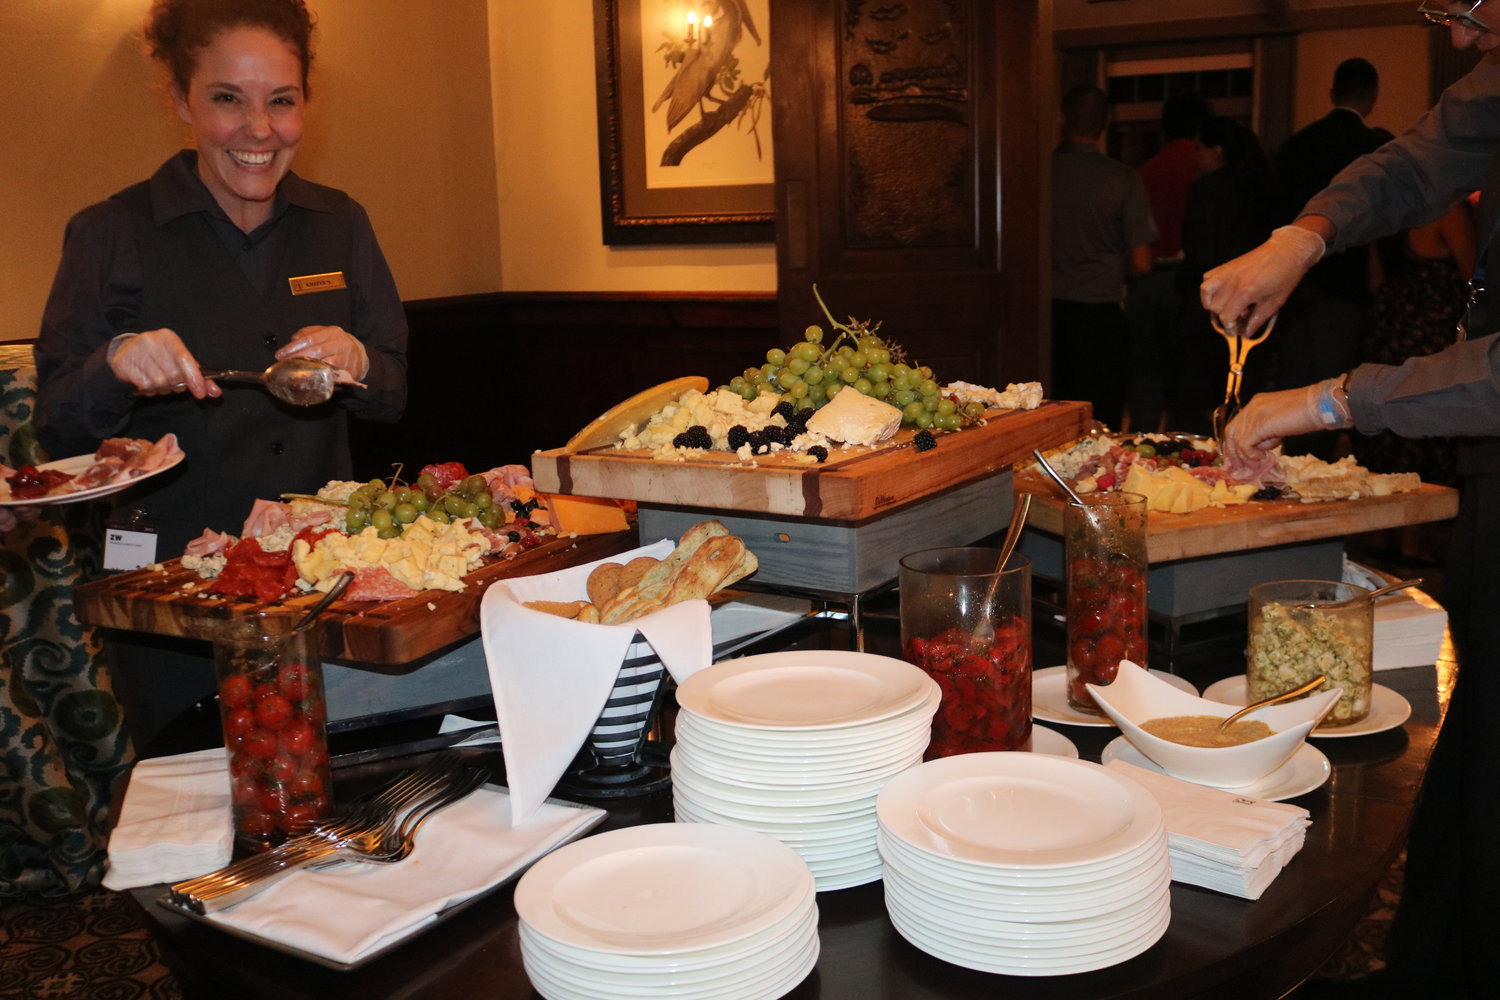 An assortment of delicious foods were available for attendees to enjoy.